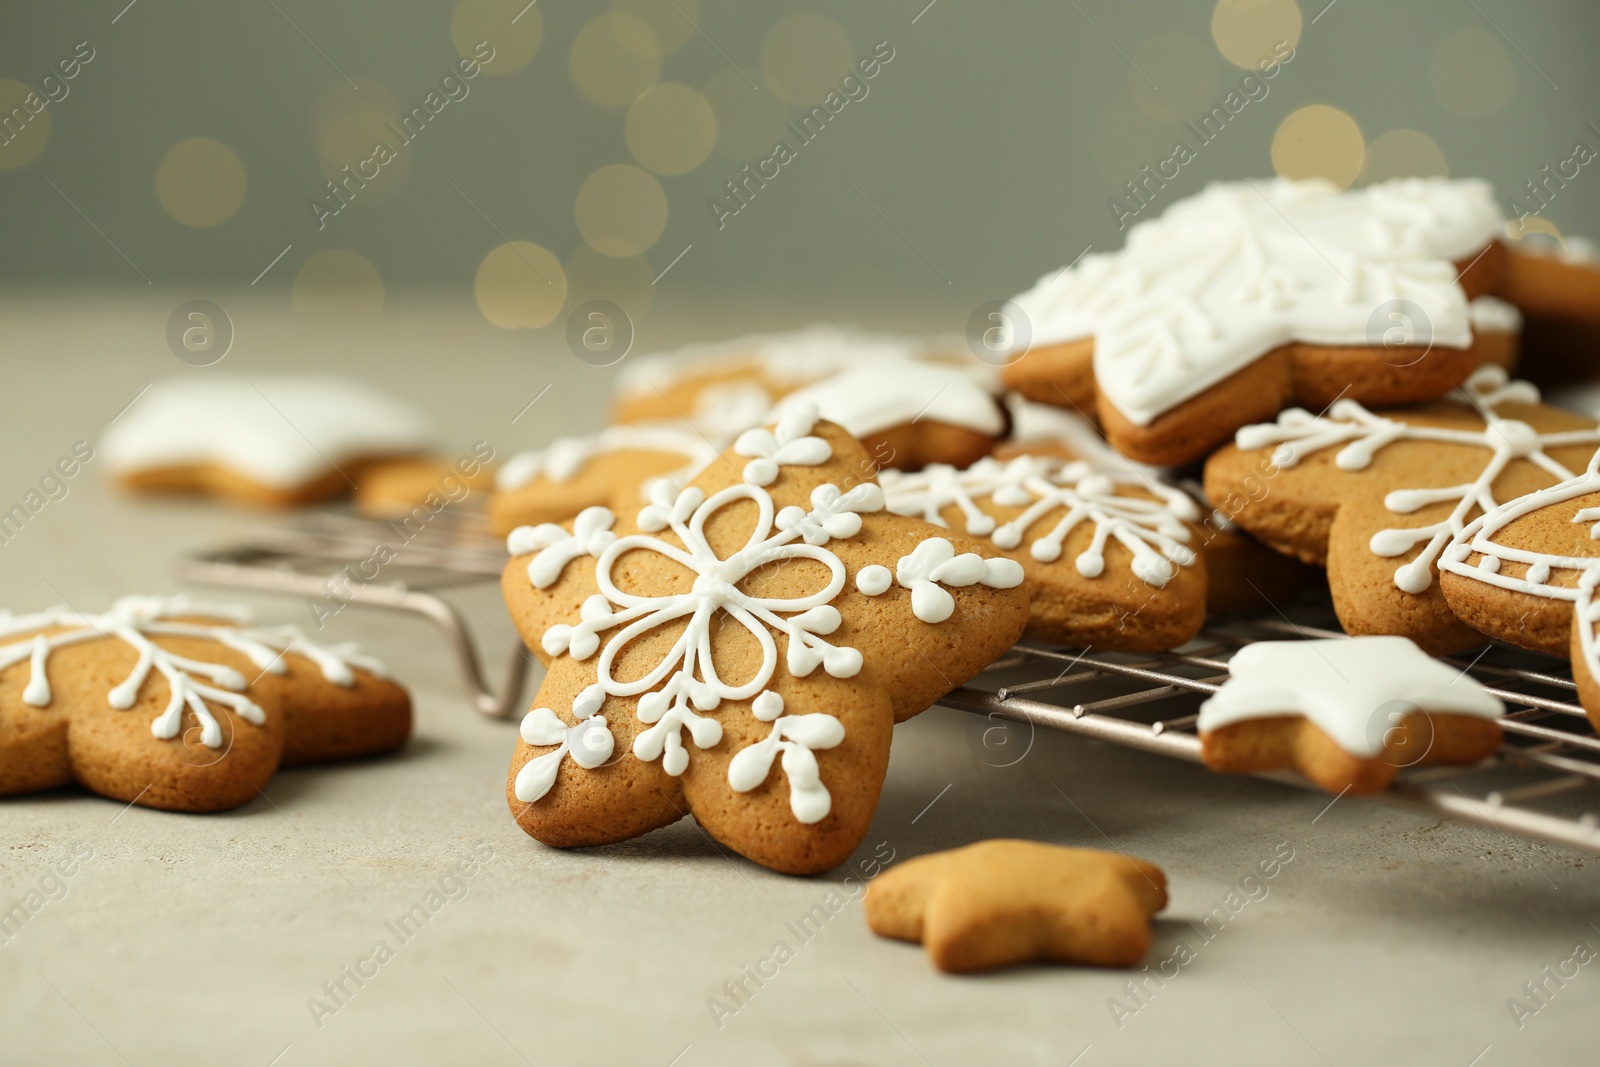 Photo of Tasty Christmas cookies with icing on table against blurred lights, closeup